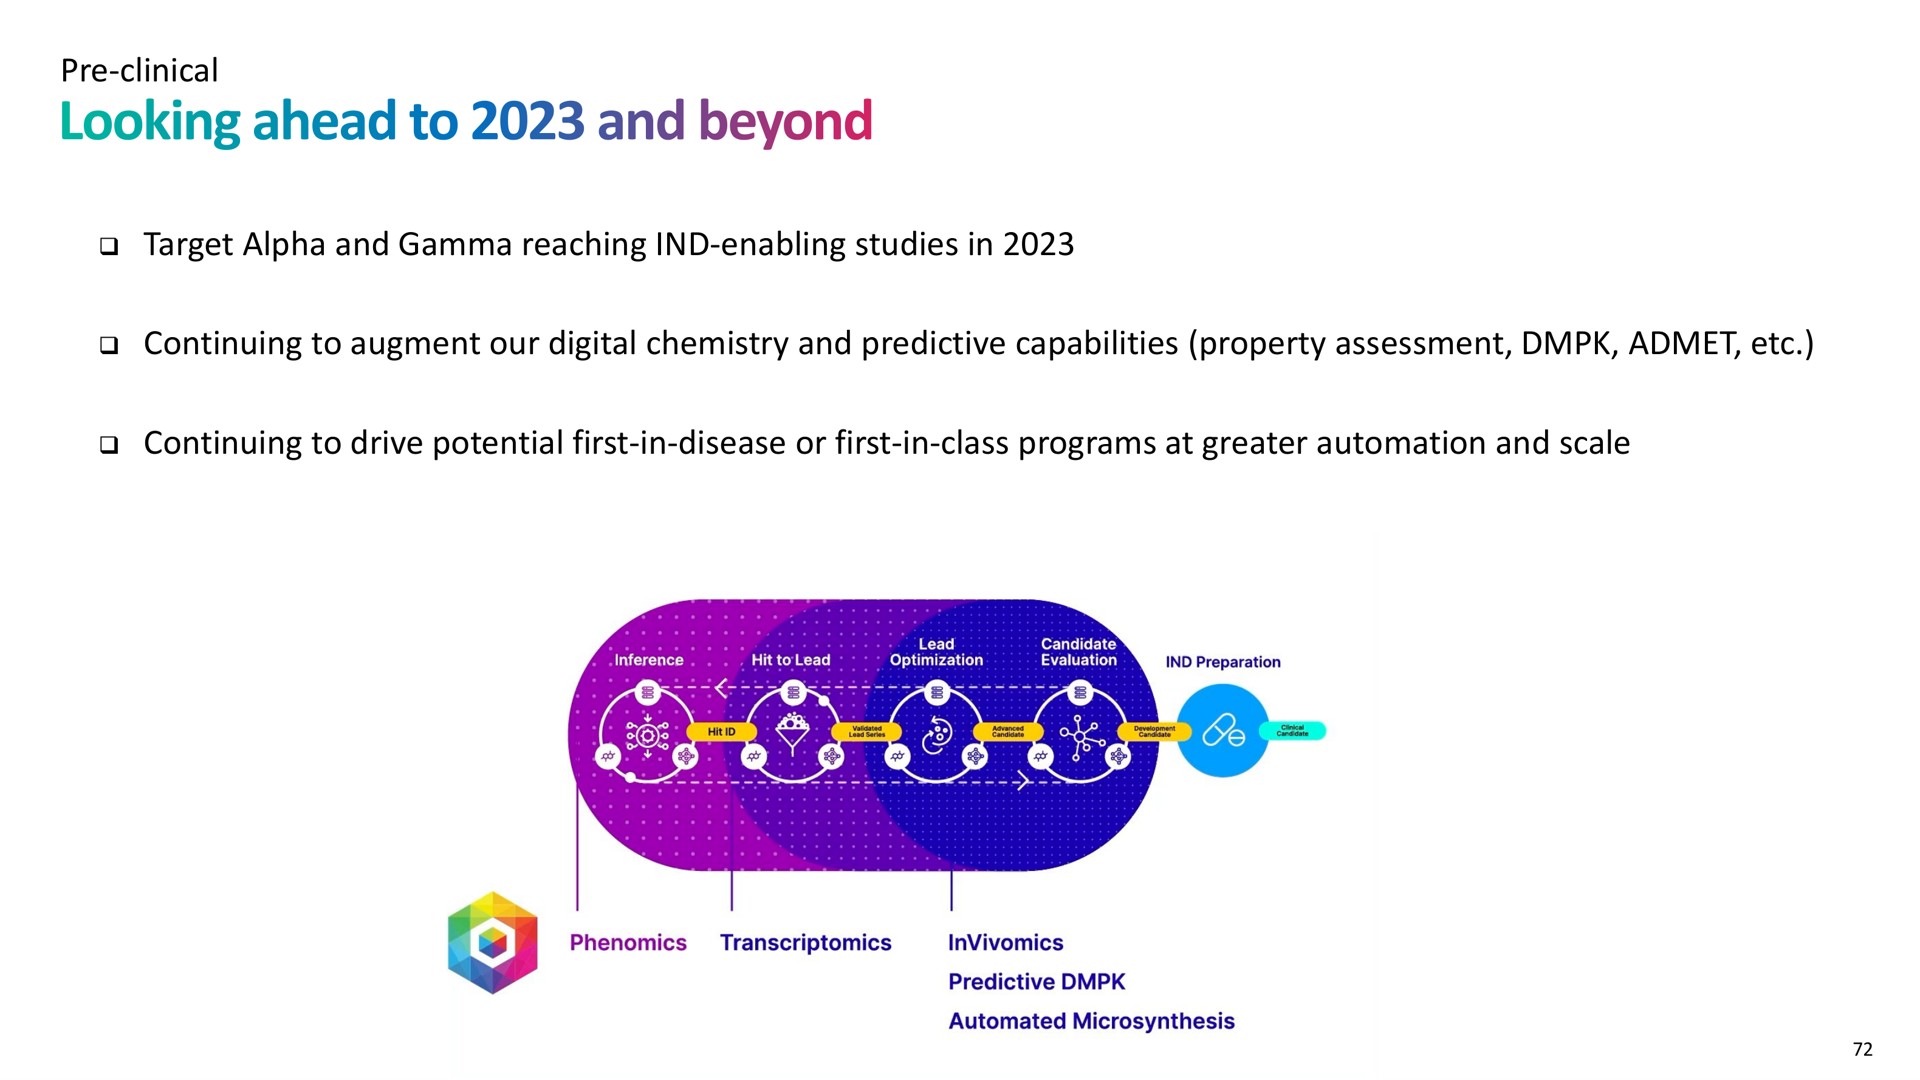 clinical target alpha and gamma reaching enabling studies in continuing to augment our digital chemistry and predictive capabilities property assessment continuing to drive potential first in disease or first in class programs at greater and scale looking ahead beyond | Recursion Pharmaceuticals